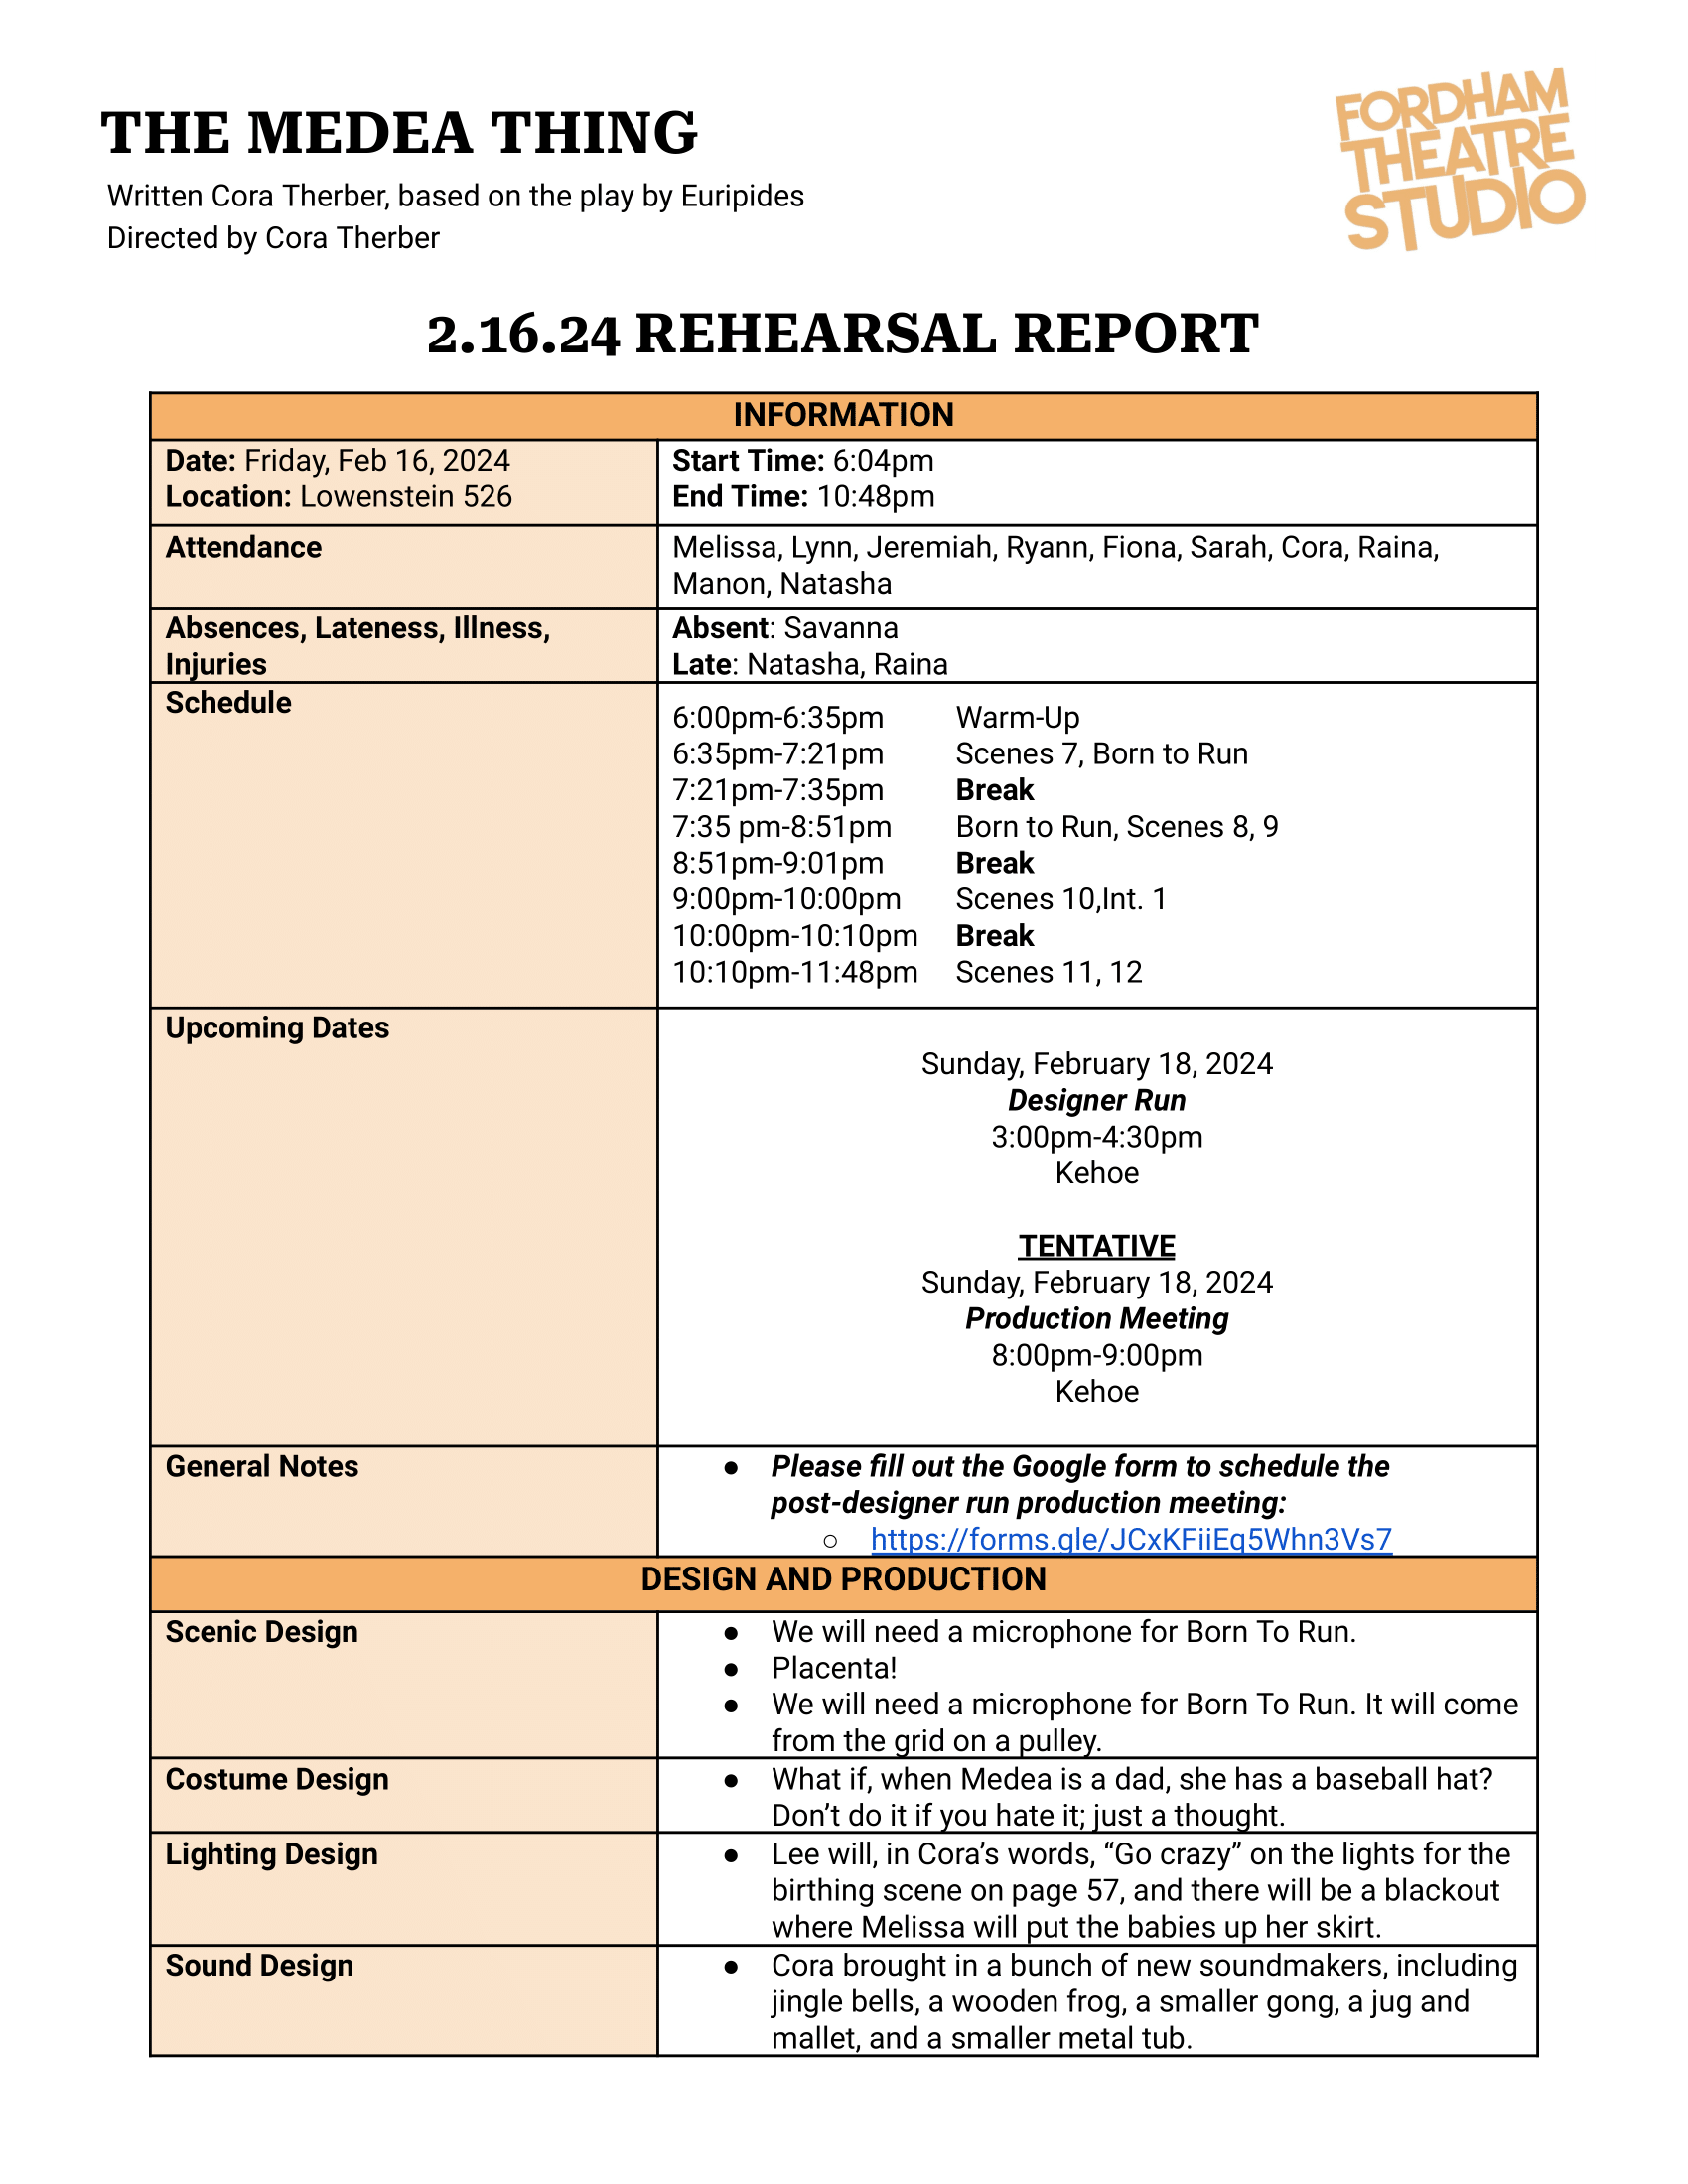 The Medea Thing _ 2.16.24 Rehearsal Report (1)-1.png